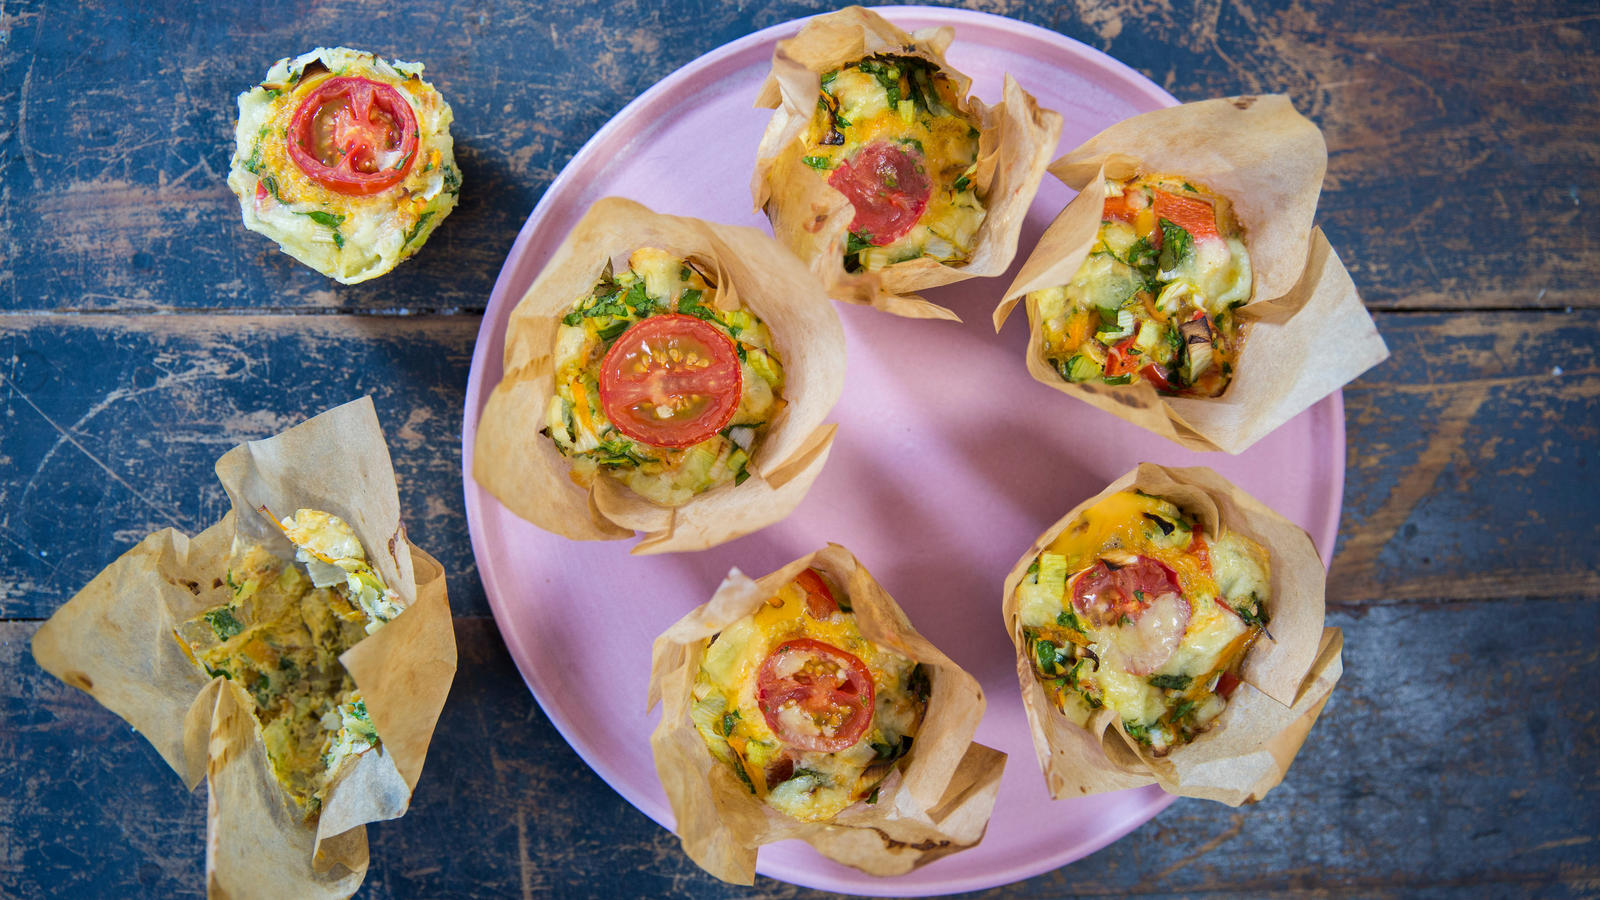 Picture Shows: Muffin frittatas